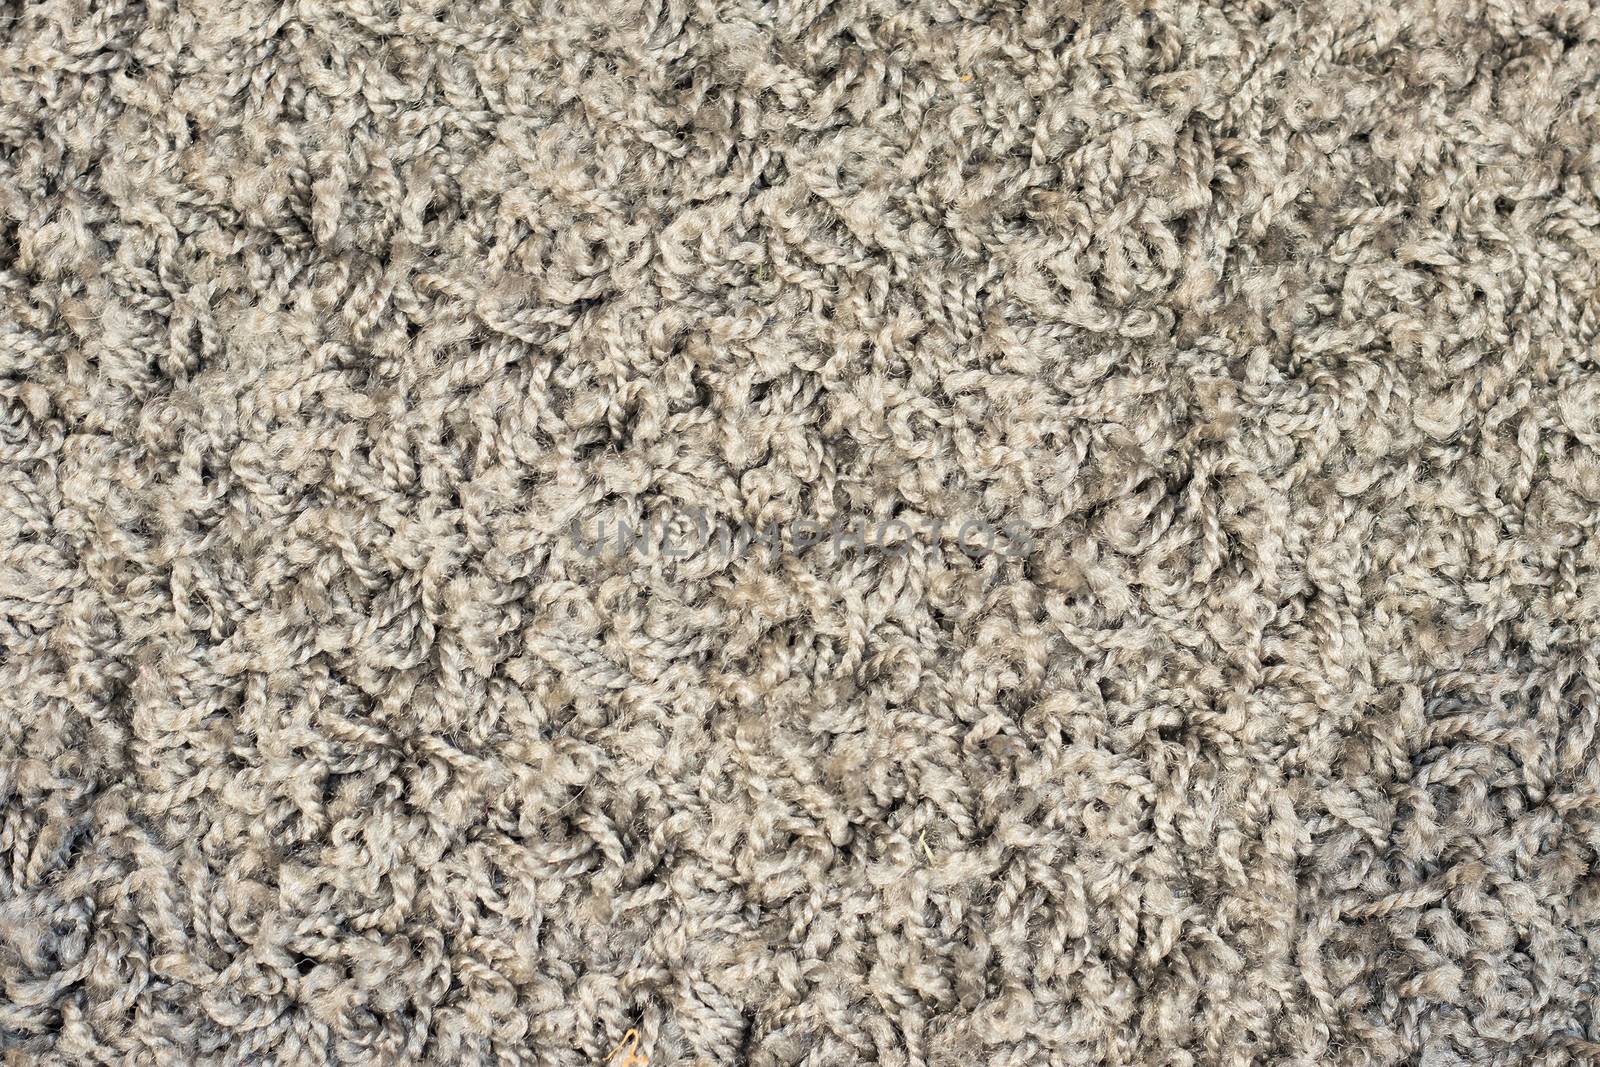 A full frame closeup in a gray and black carpet.